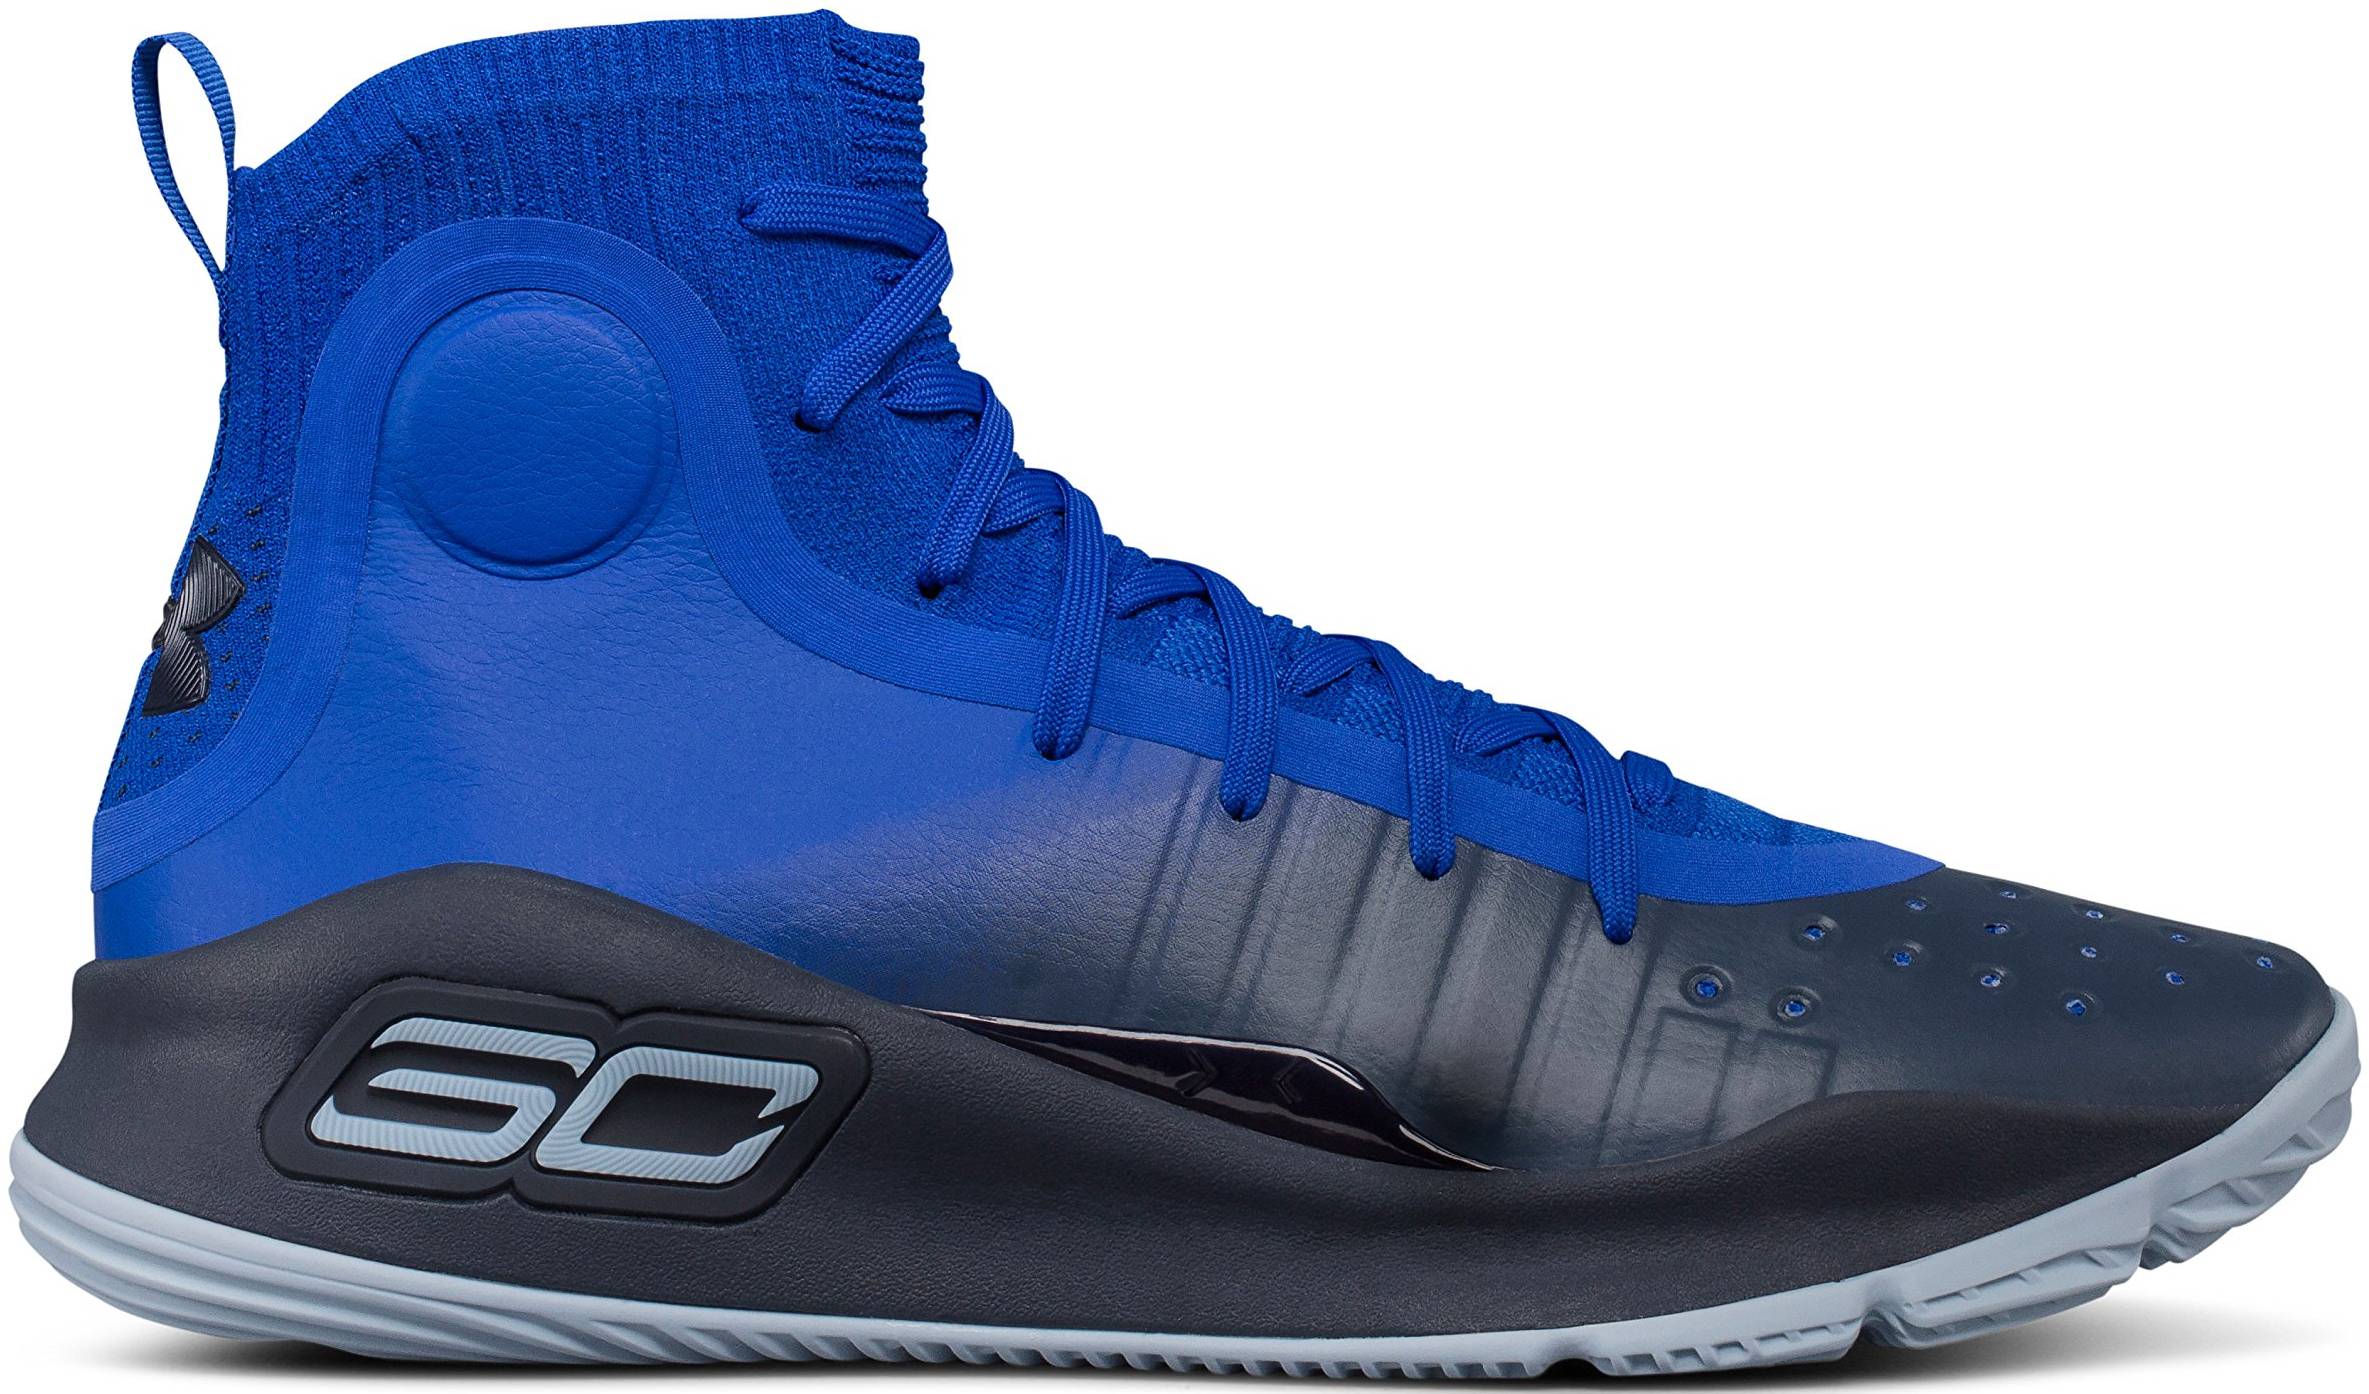 under armour men's curry